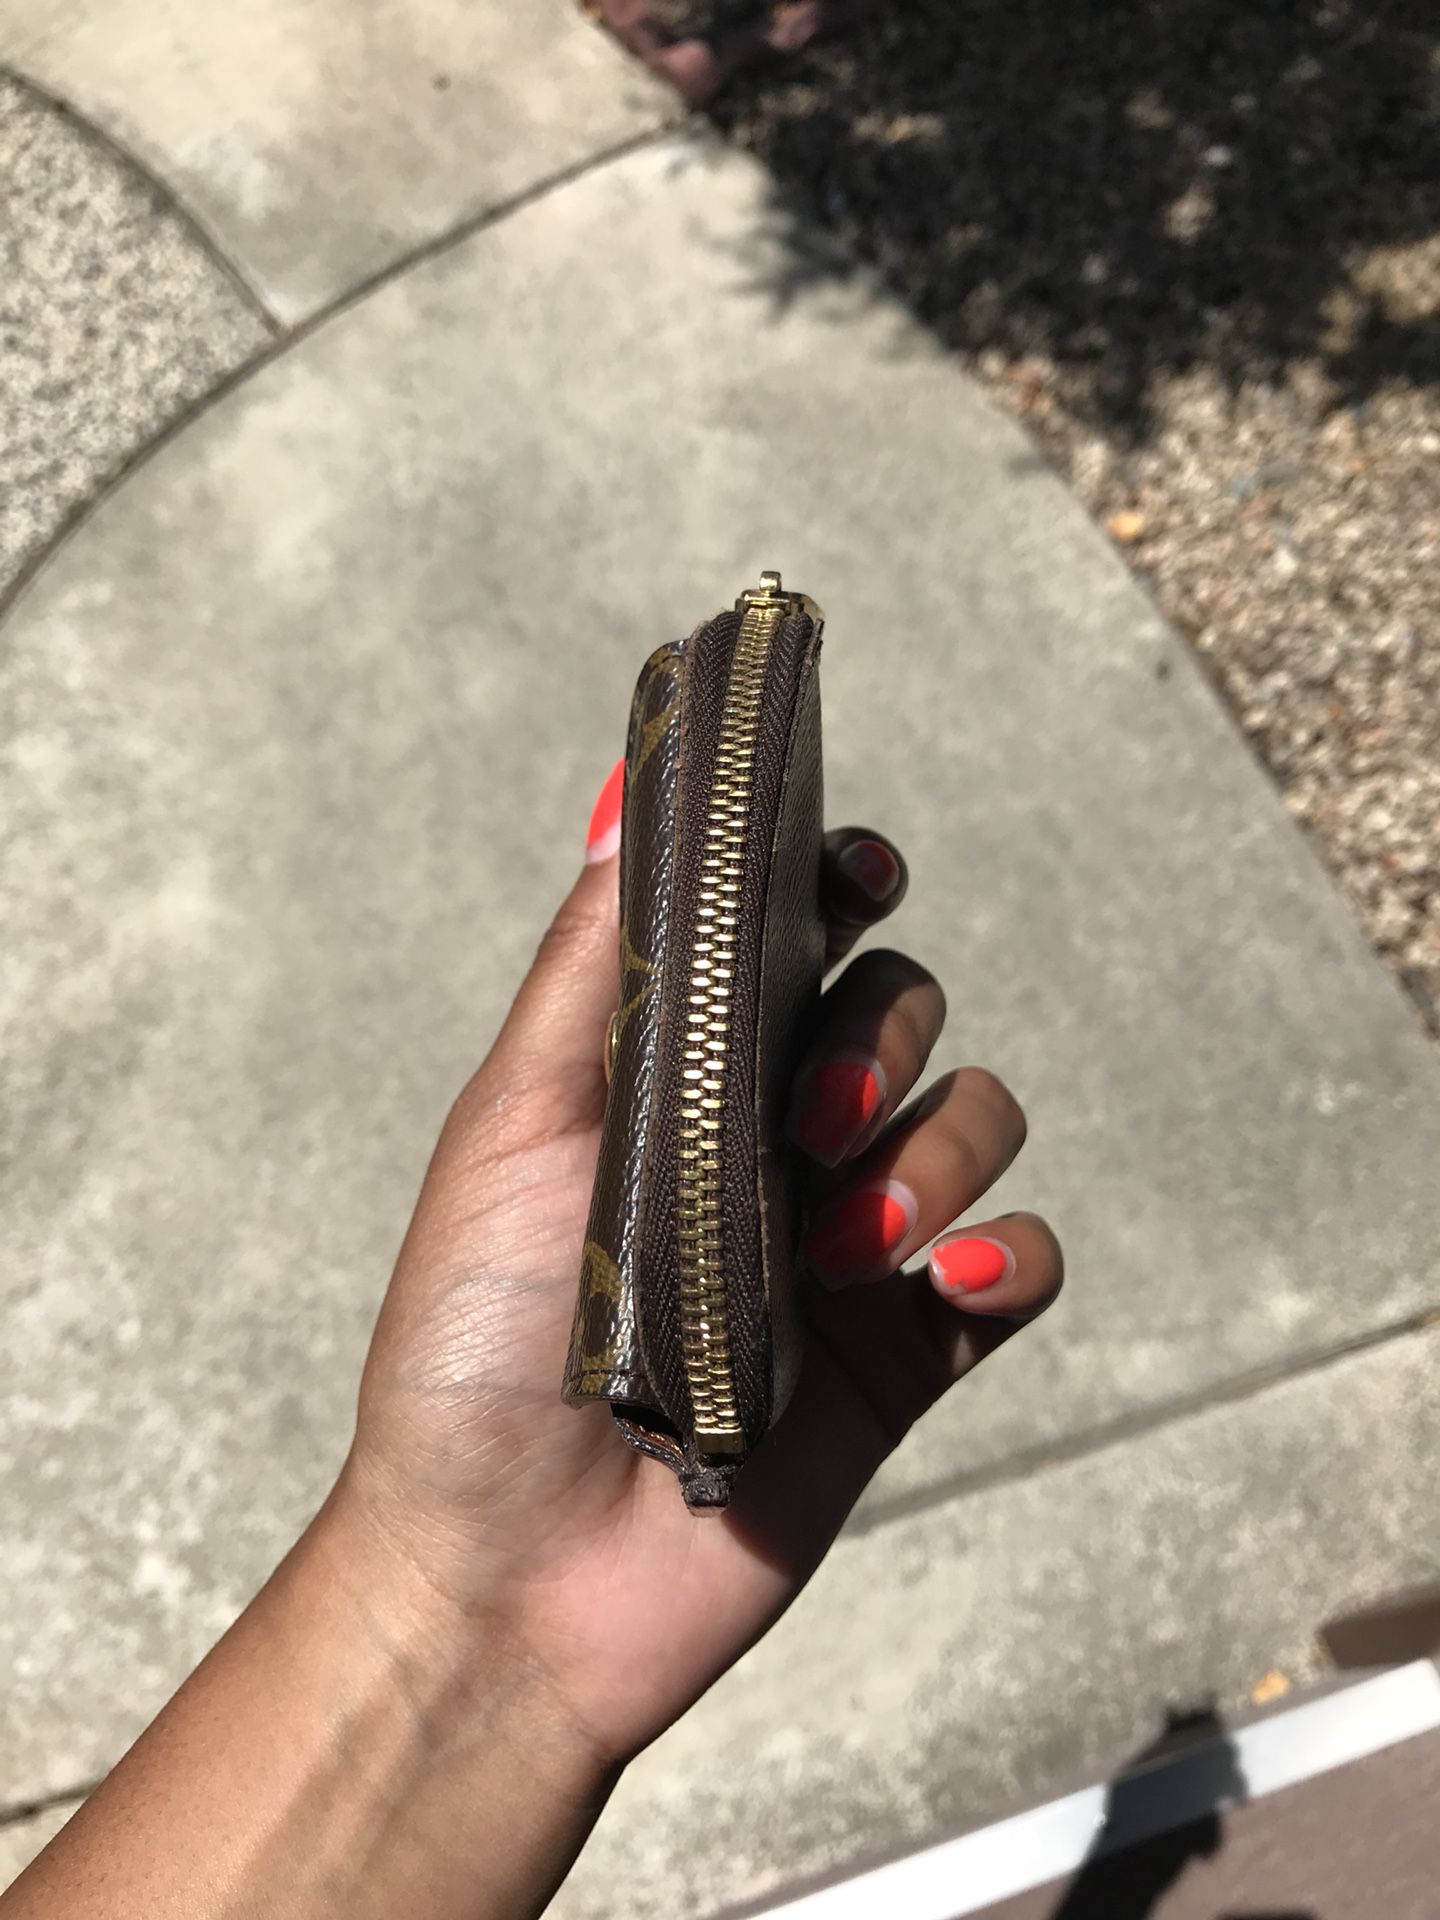 Louis Vuitton coin pouch for Sale in Emeryville, CA - OfferUp